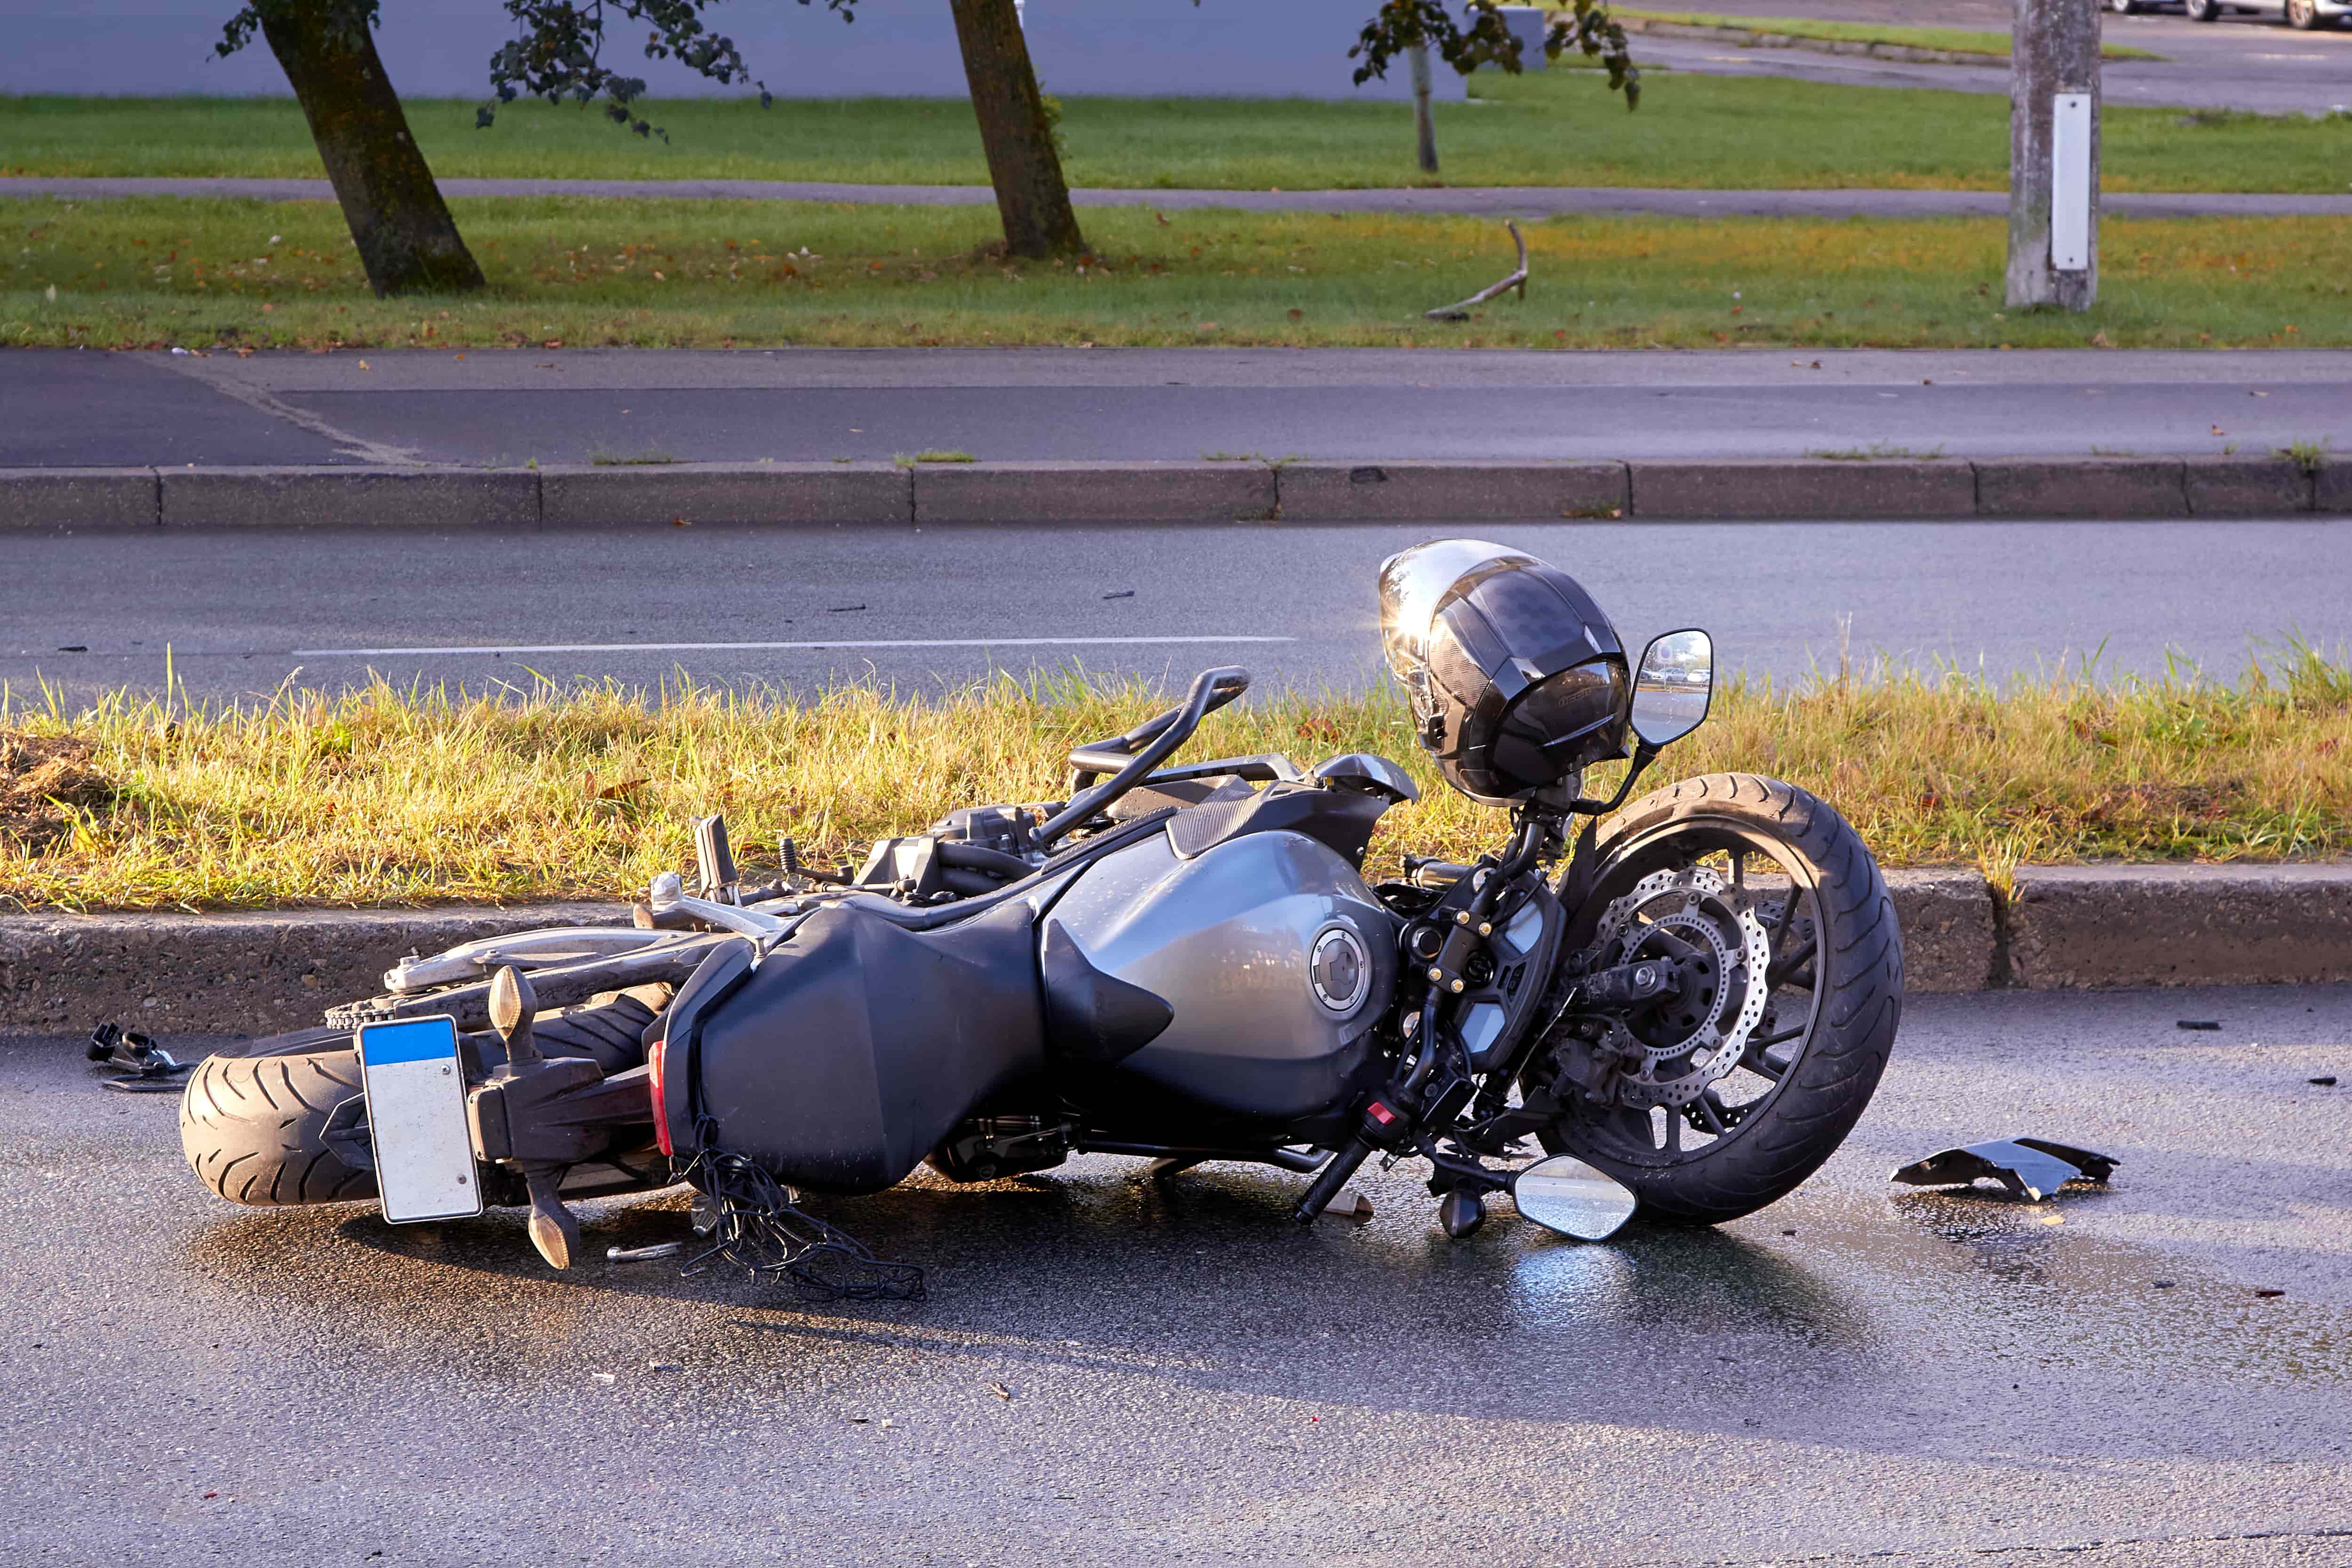 Motorcycle on the road on its side 